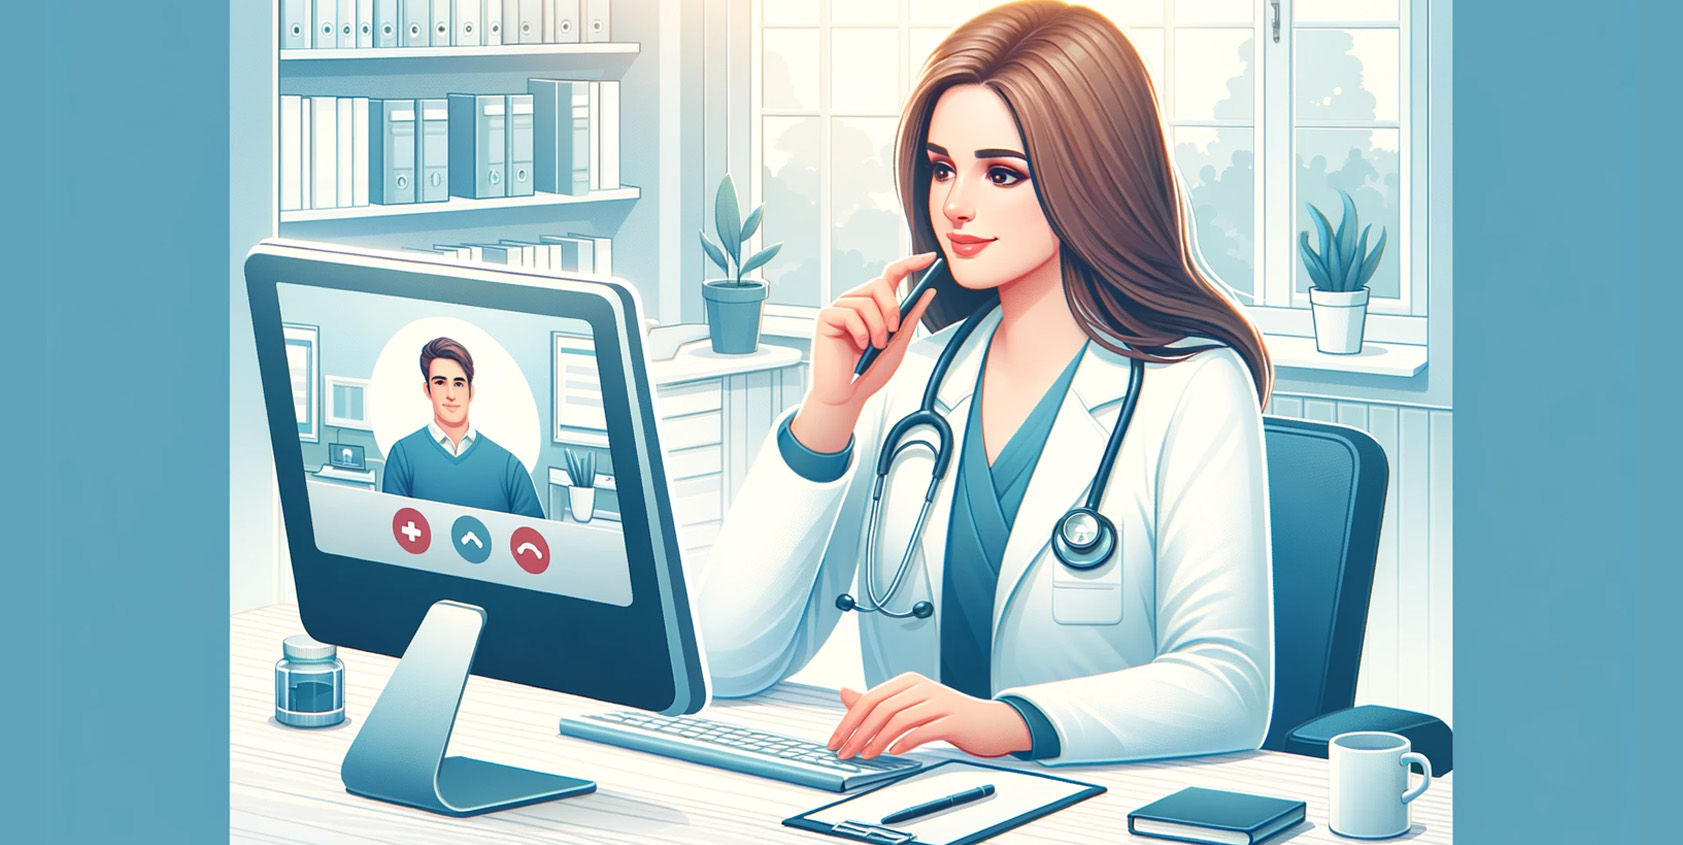 Your Virtual Doctor Awaits - Experience the Future of Online Doctor Consultation Services